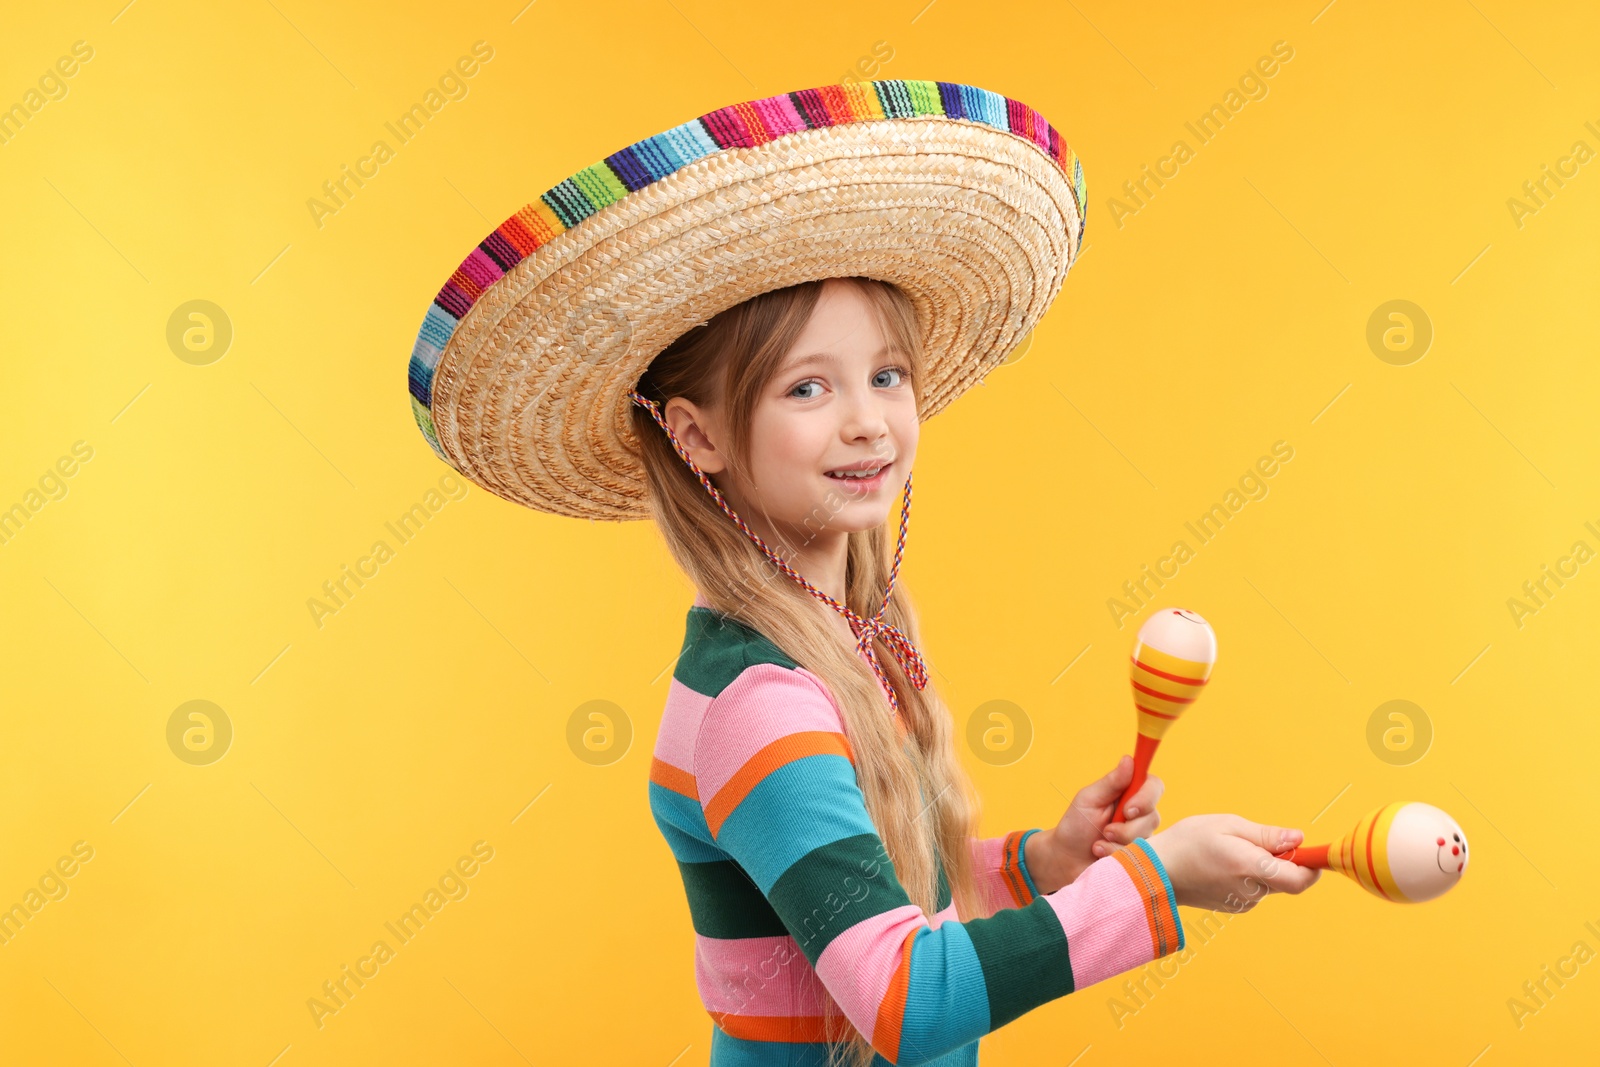 Photo of Cute girl in Mexican sombrero hat dancing with maracas on orange background